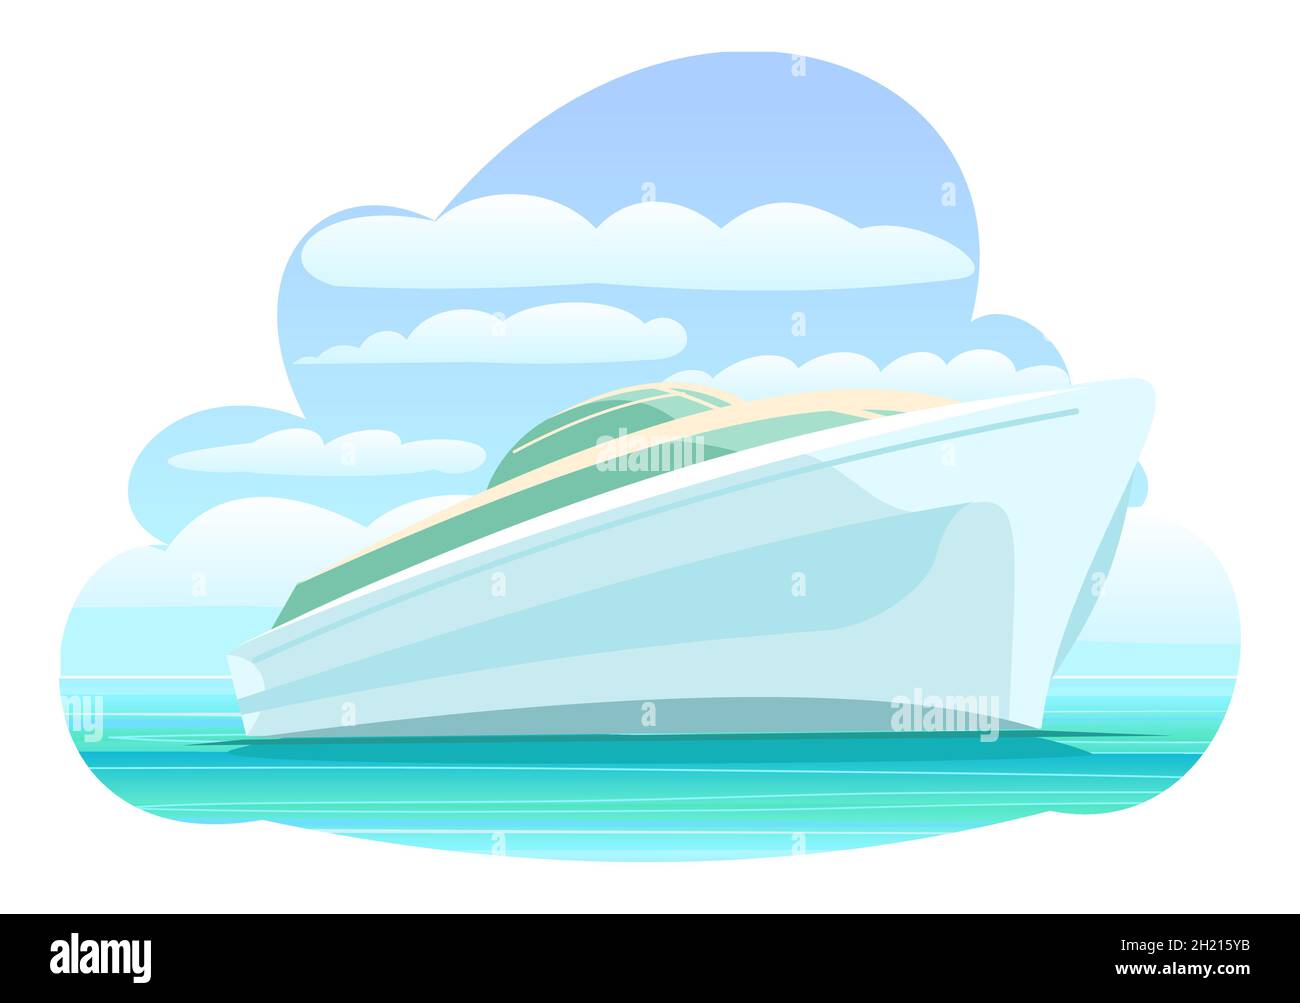 Ocean yacht. A modern multi tiered luxury vessel. Large passenger ship. Flat style. Calm blue sea. Composition in form of cloud. Isolated on white Stock Vector